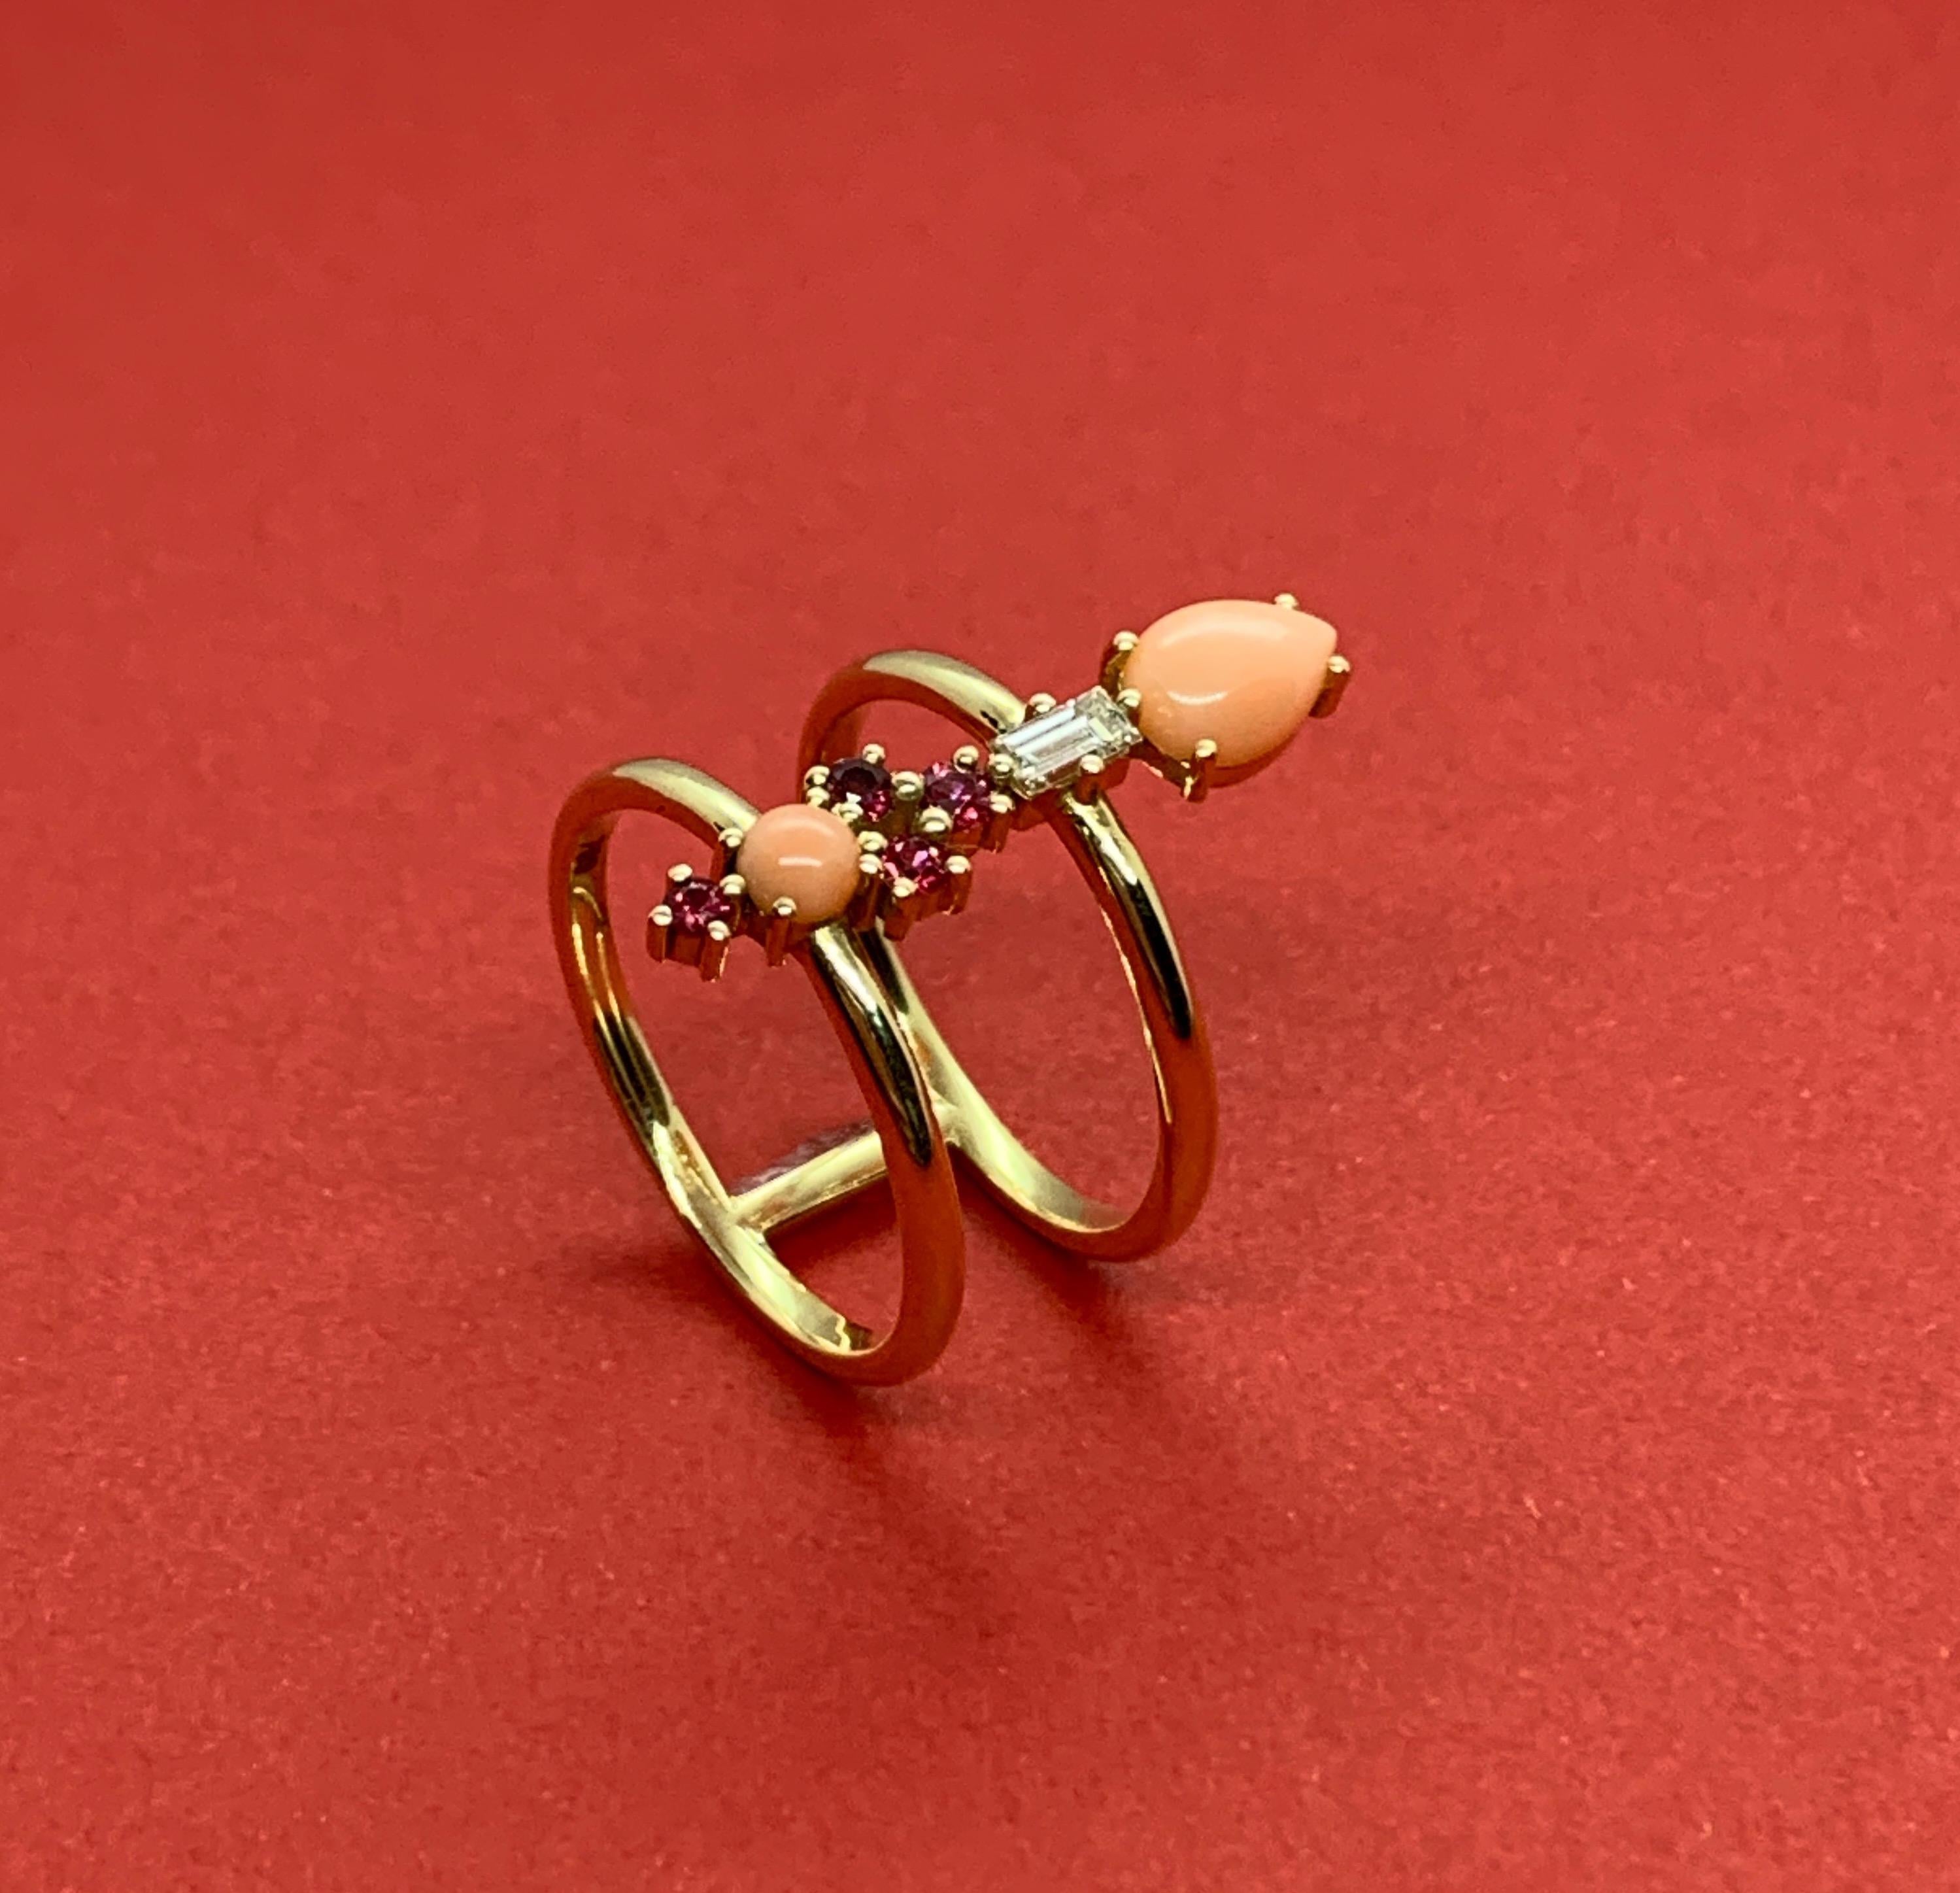 Contemporary Colorful 18 Karat Gold Ring with Spinels, Corals and a Baguette Diamond